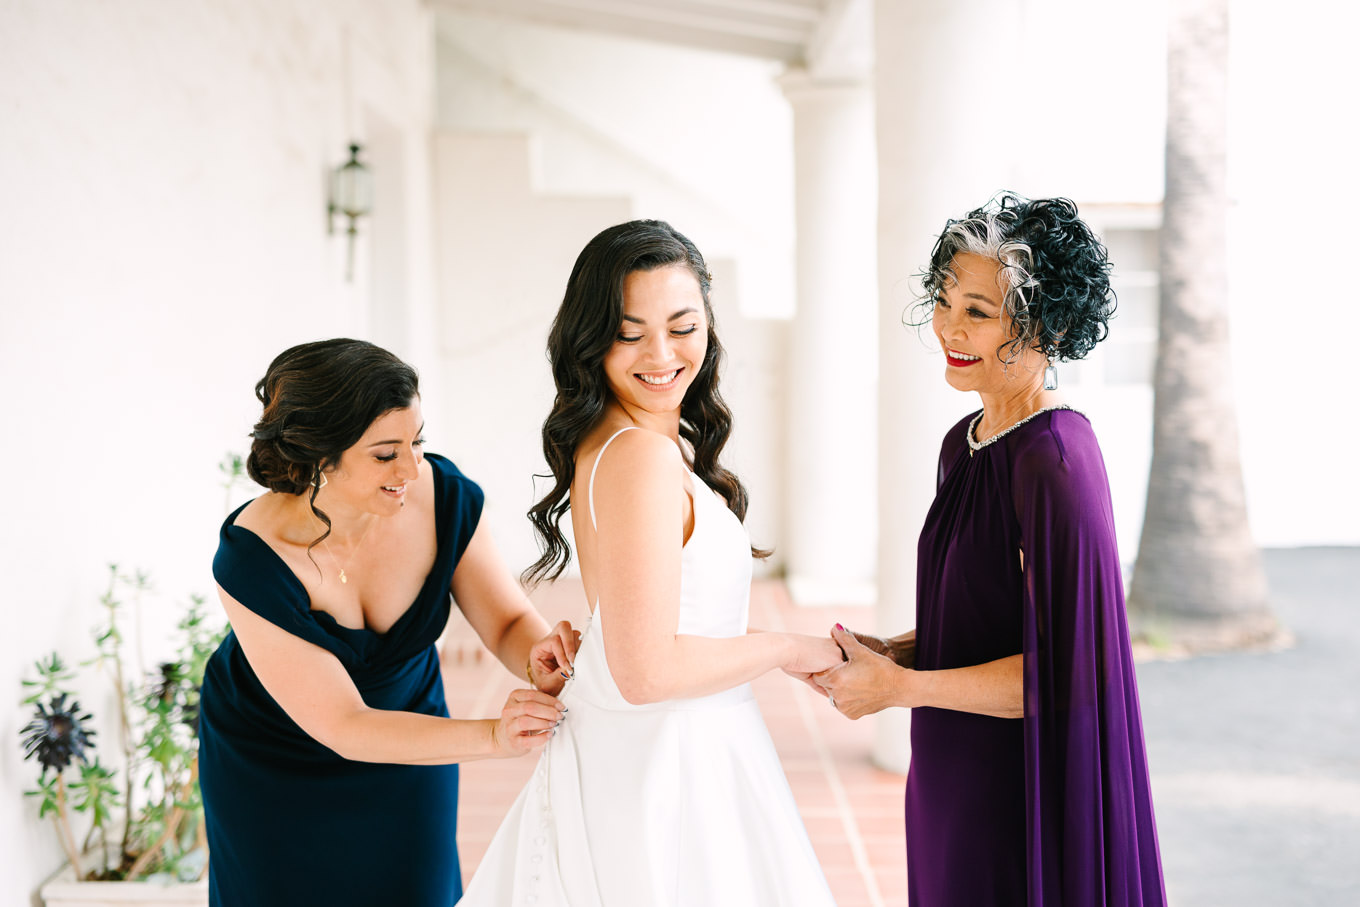 King Gillette Ranch wedding | Wedding and elopement photography roundup | Los Angeles and Palm Springs photographer | #losangeleswedding #palmspringswedding #elopementphotographer Source: Mary Costa Photography | Los Angeles